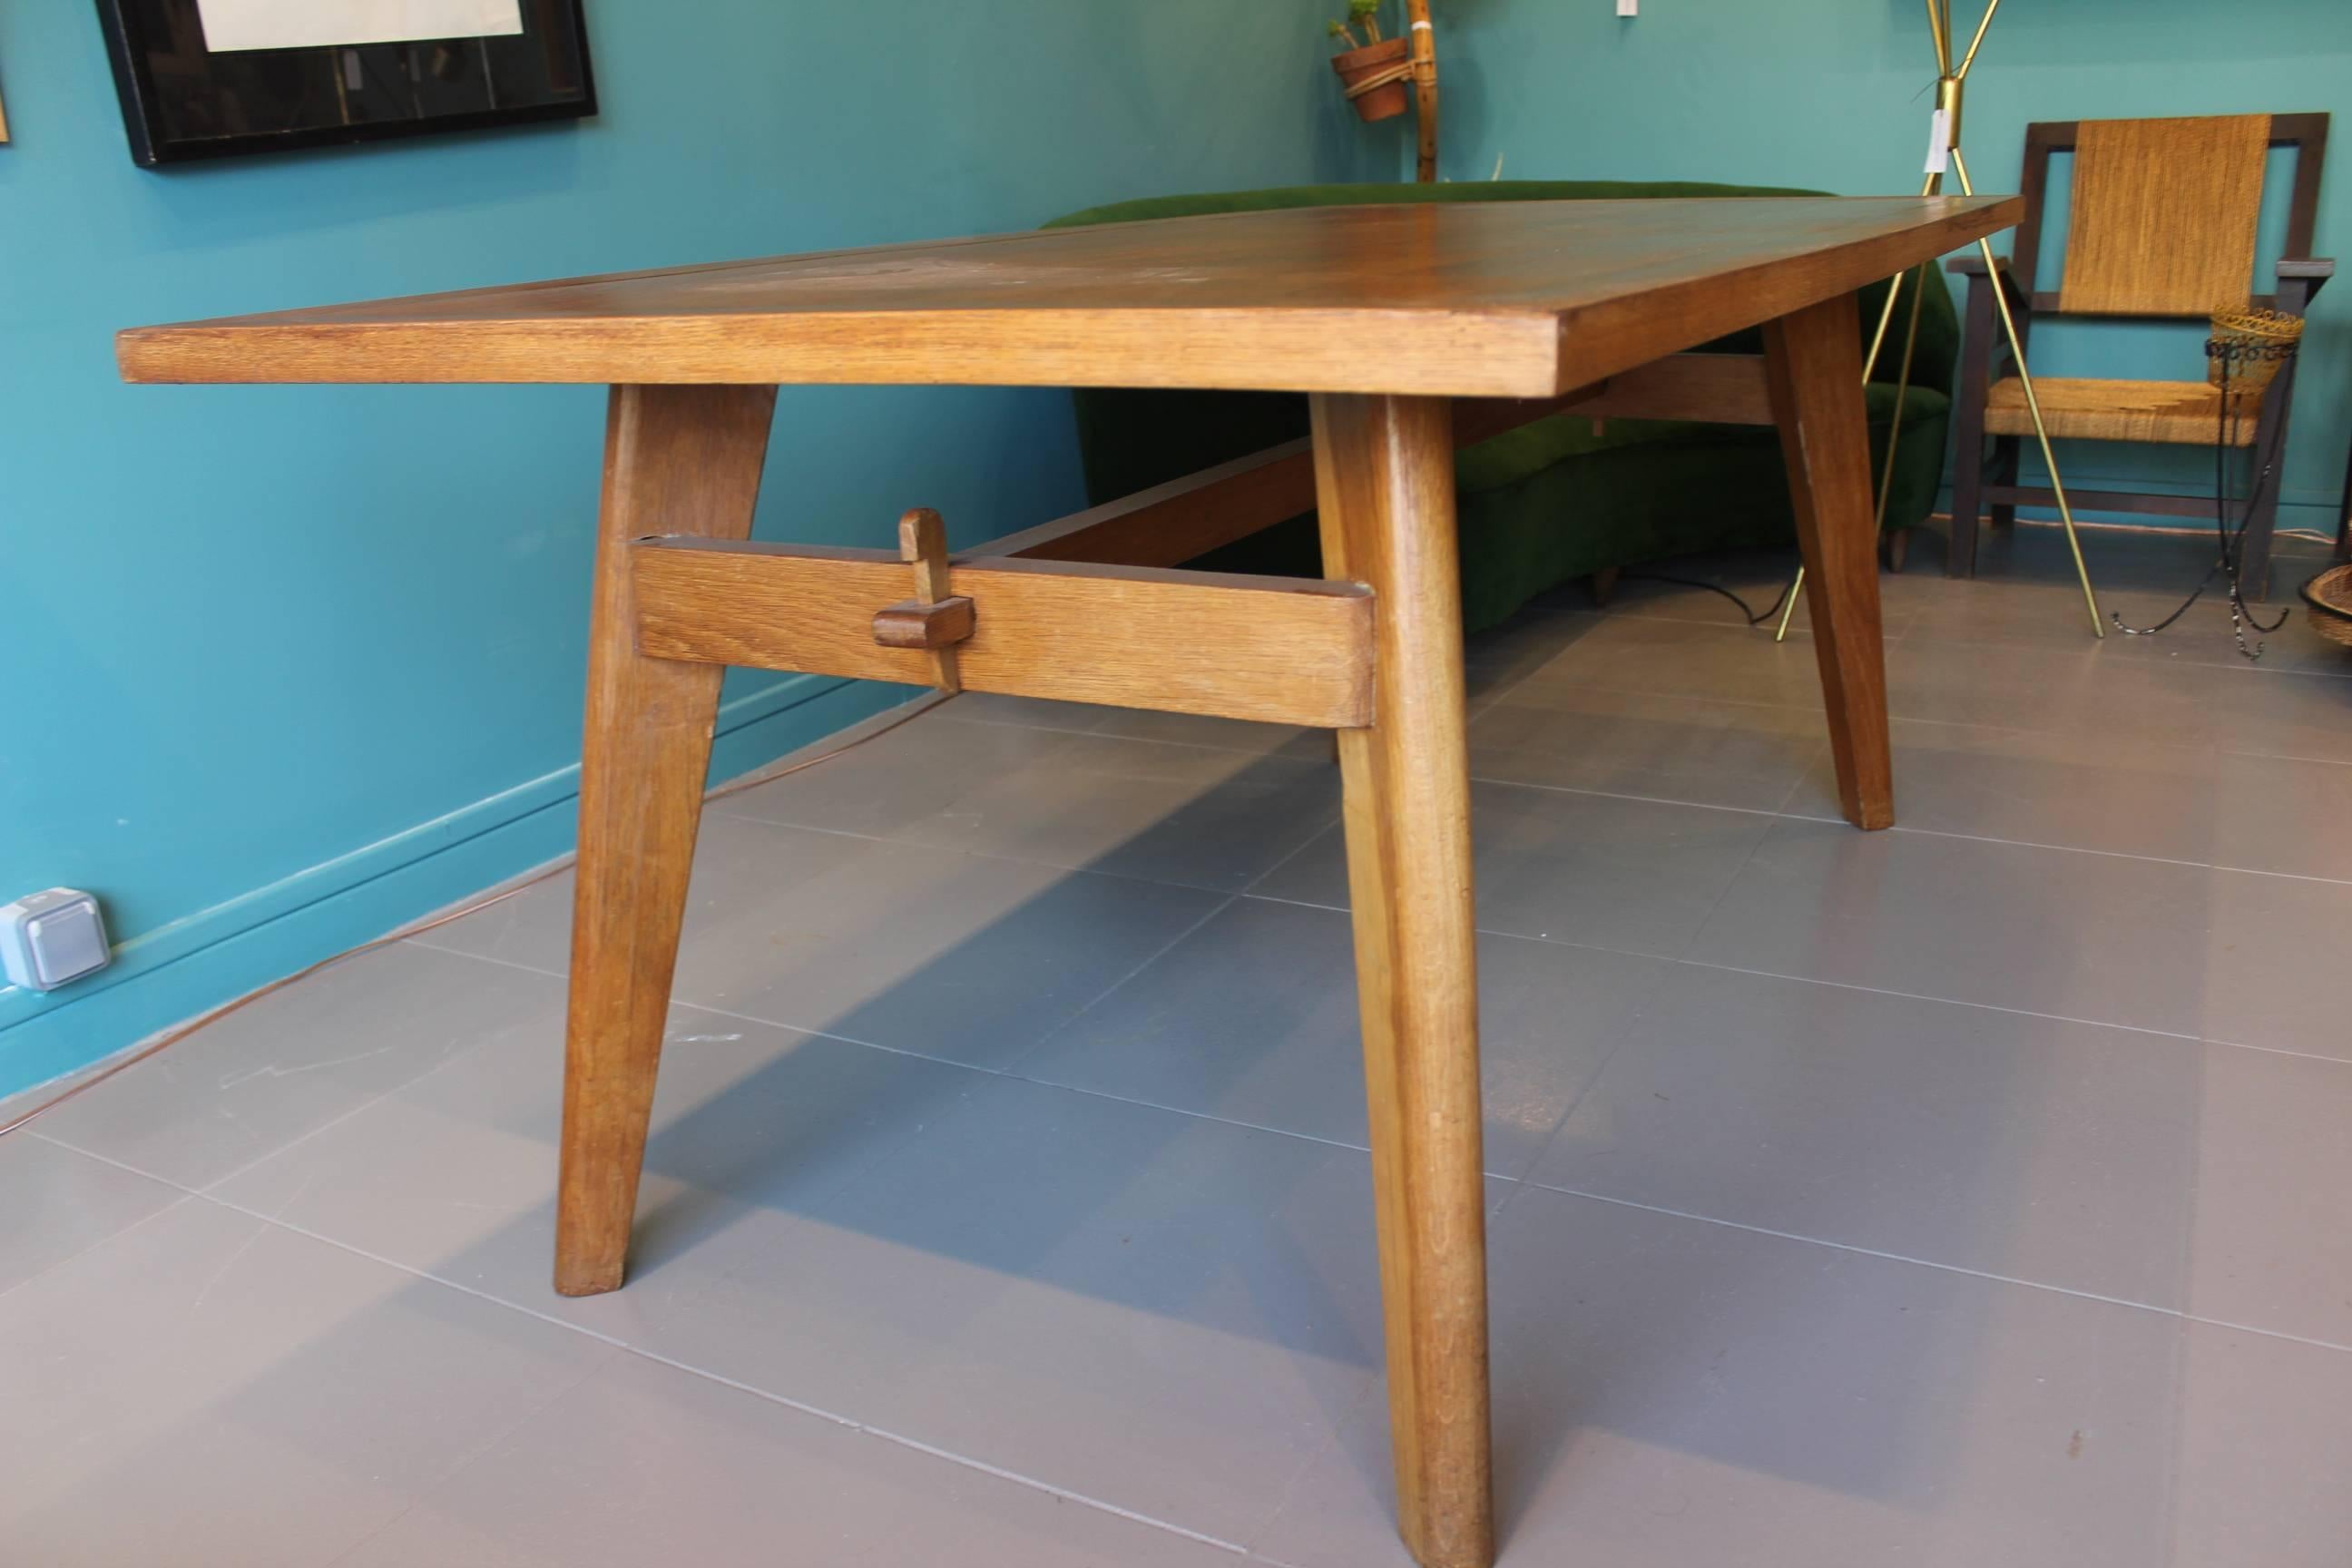 Fantastic Dining Table In The Taste Of Pierre Jeanneret and Charlotte Perriand, circa 1960, in excellent condition